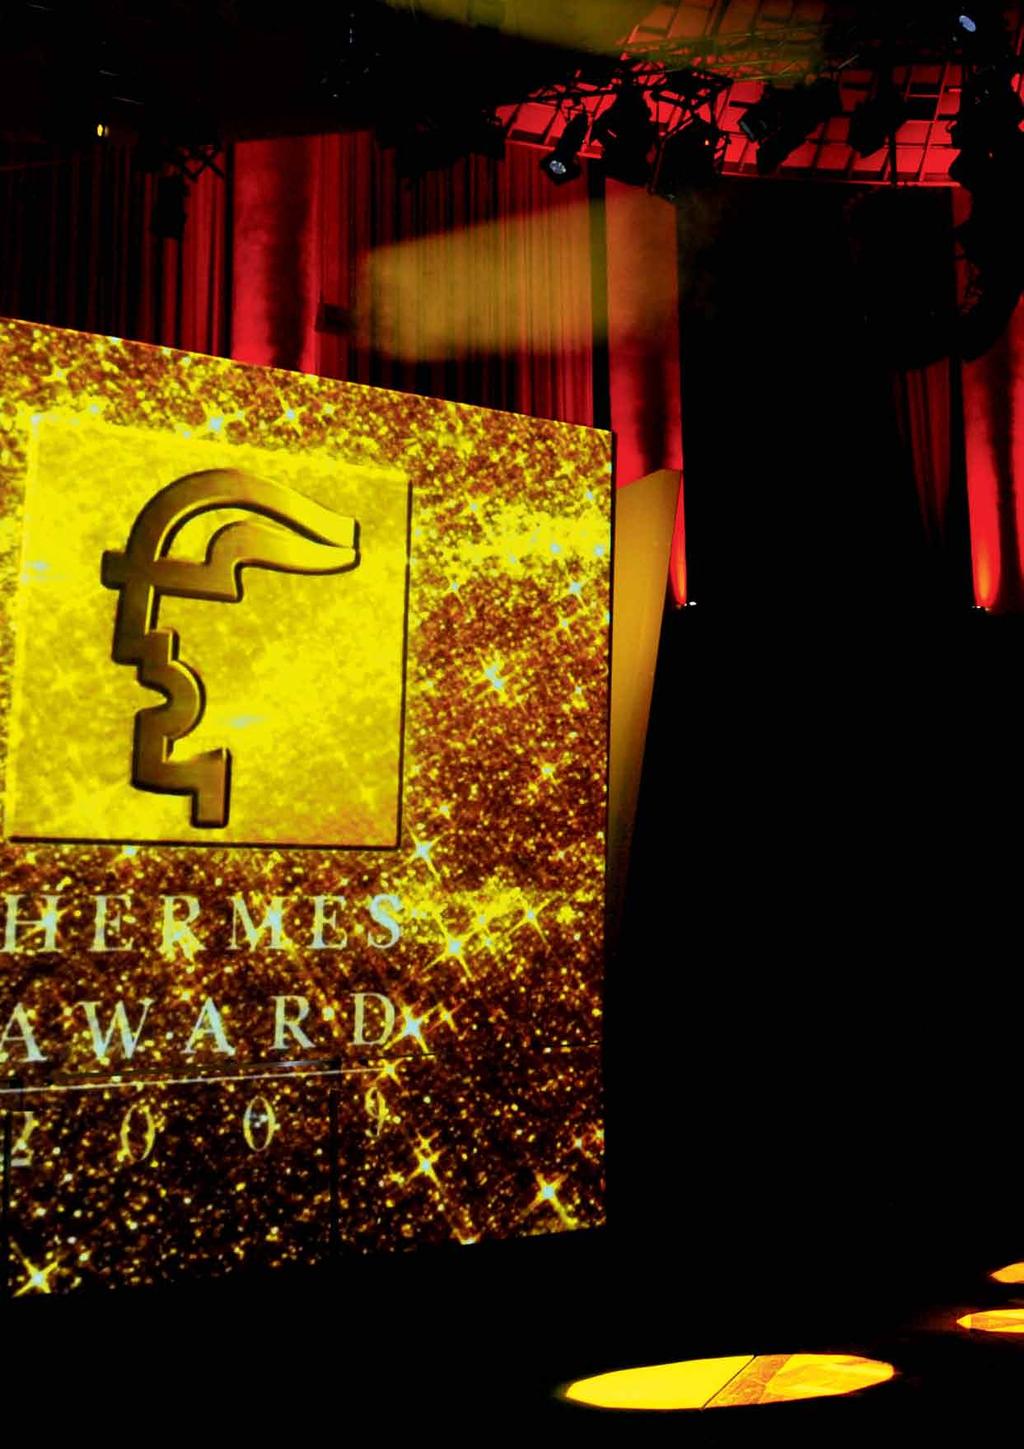 In 2010 the Hermes Award will focus attention on outstanding product innovations: at HANNOVER MESSE. Prof. Dr. Dr. h.